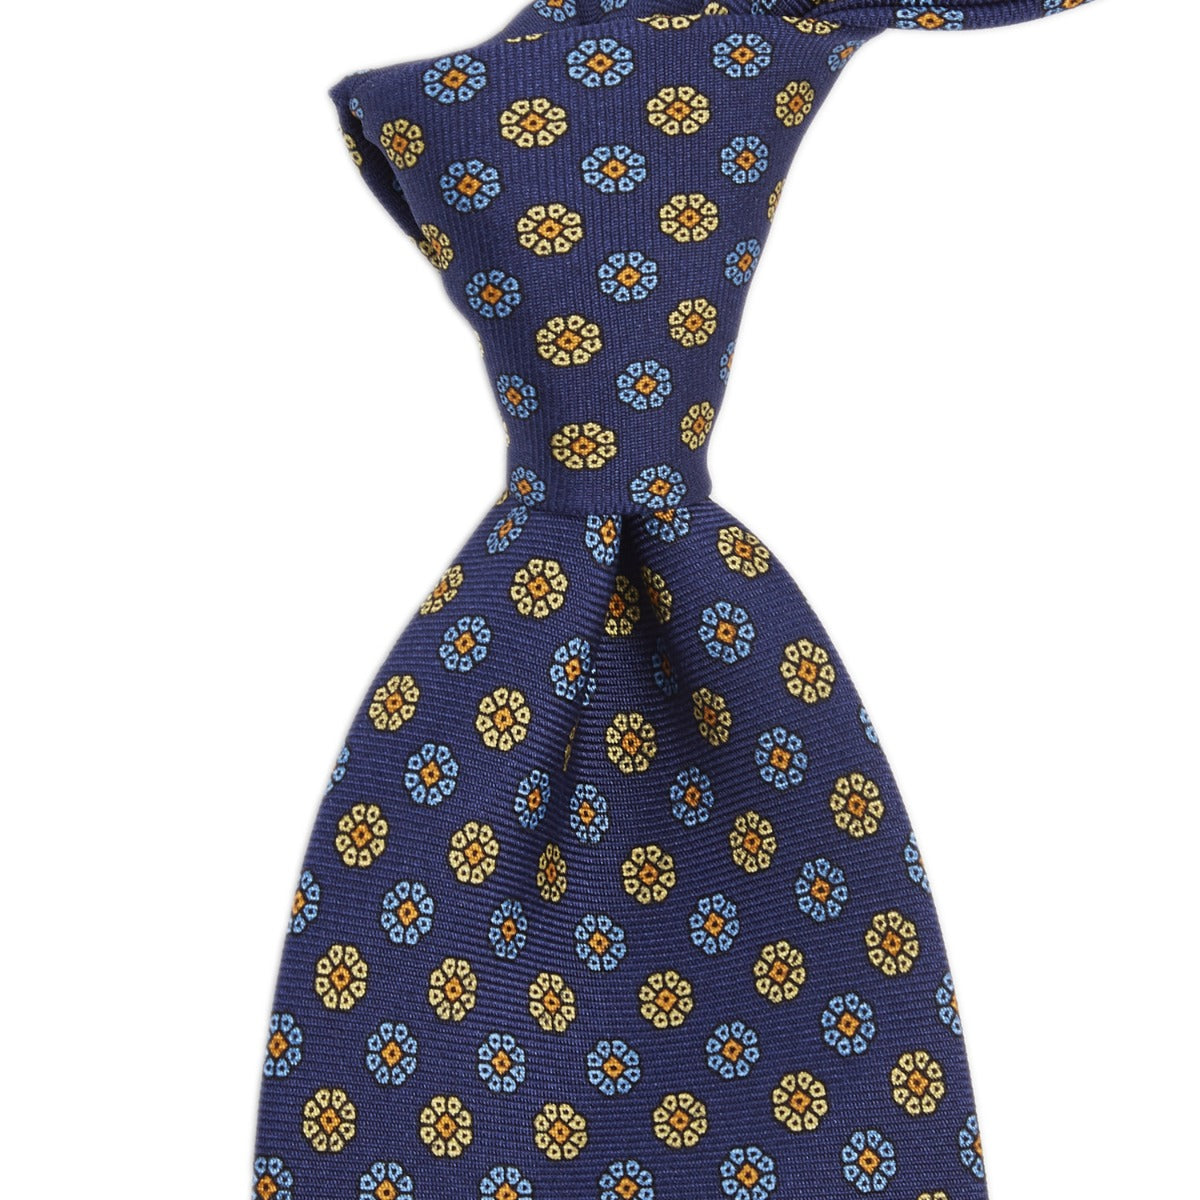 A Sovereign Grade Royal/Blue/Cream Maccesfield Corn Floral Motif tie with handmade craftsmanship and blue flowers, made by KirbyAllison.com.